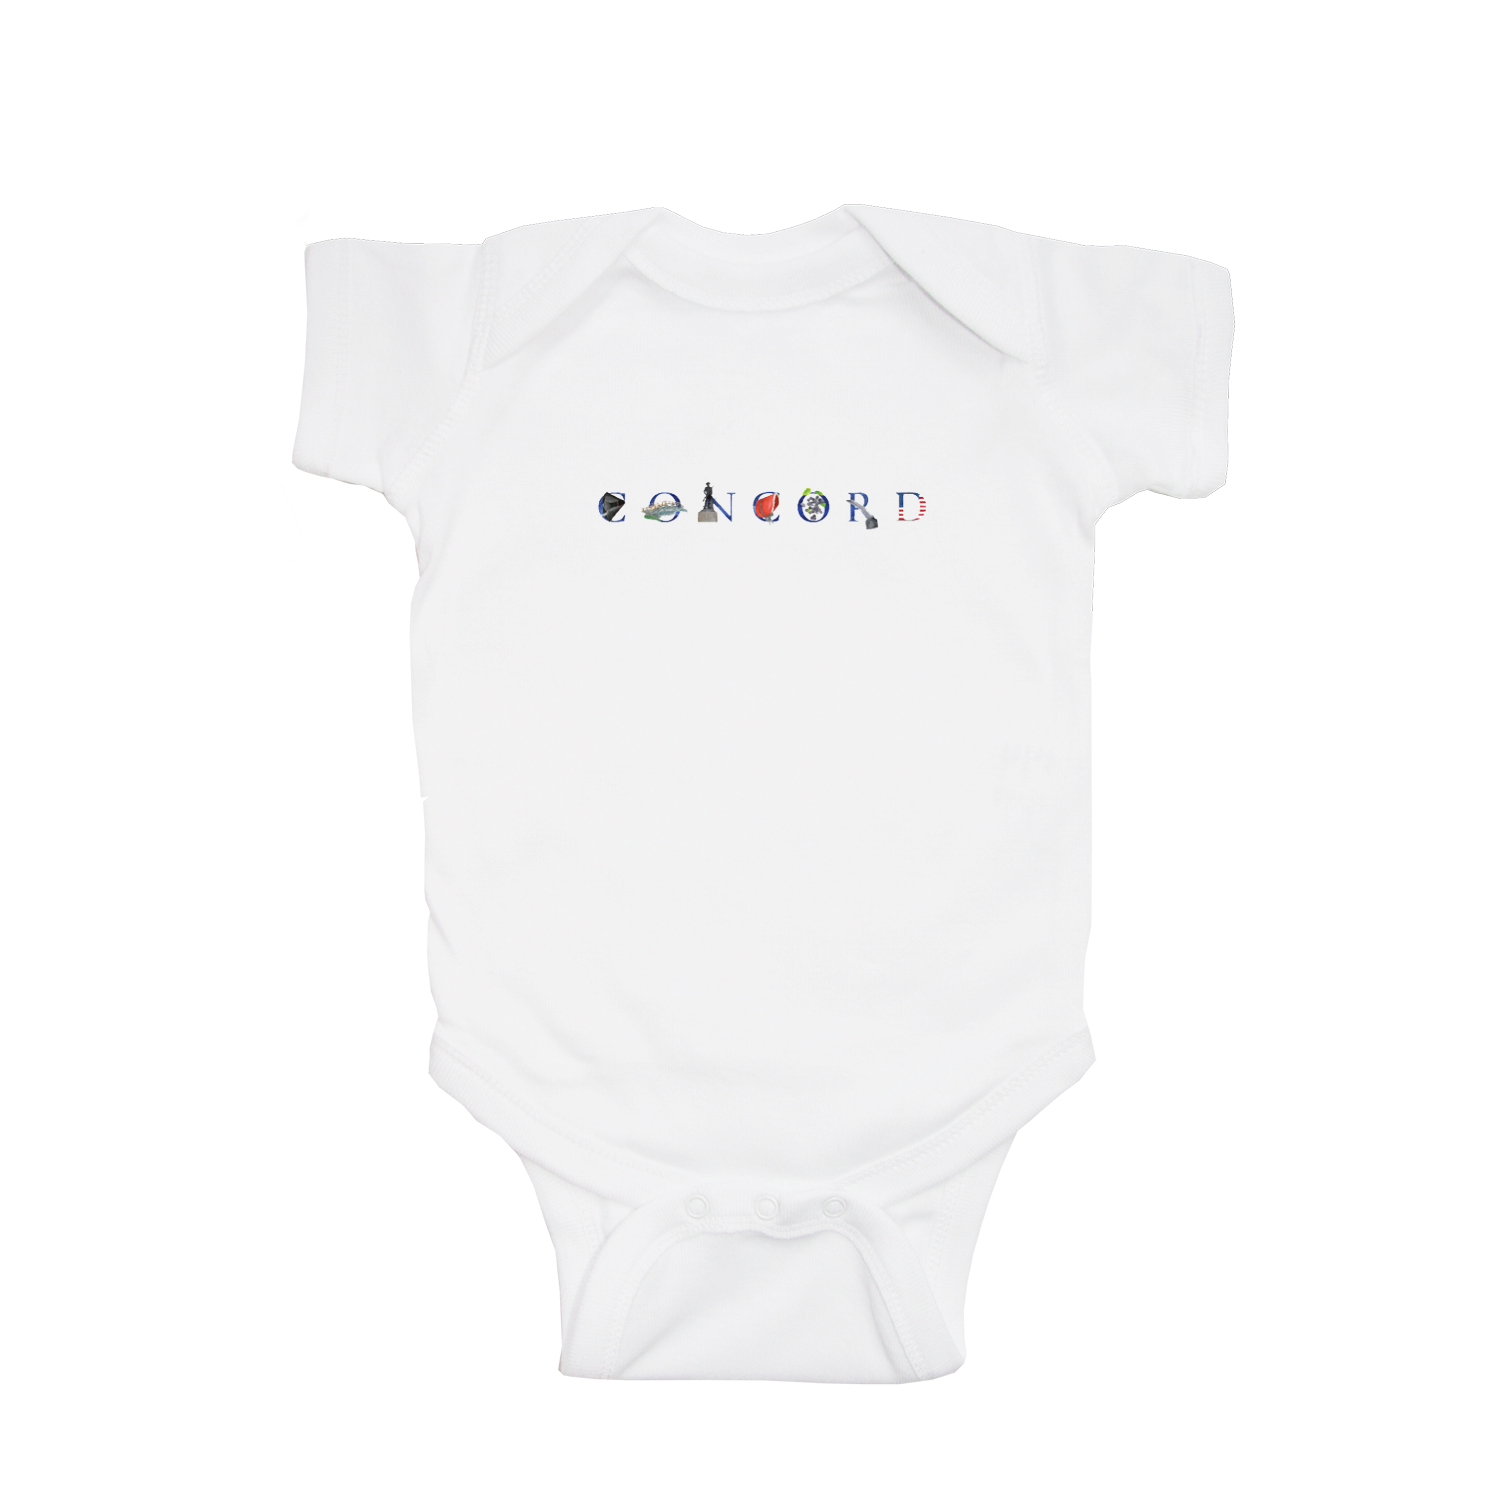 Concord baby snap up short sleeve